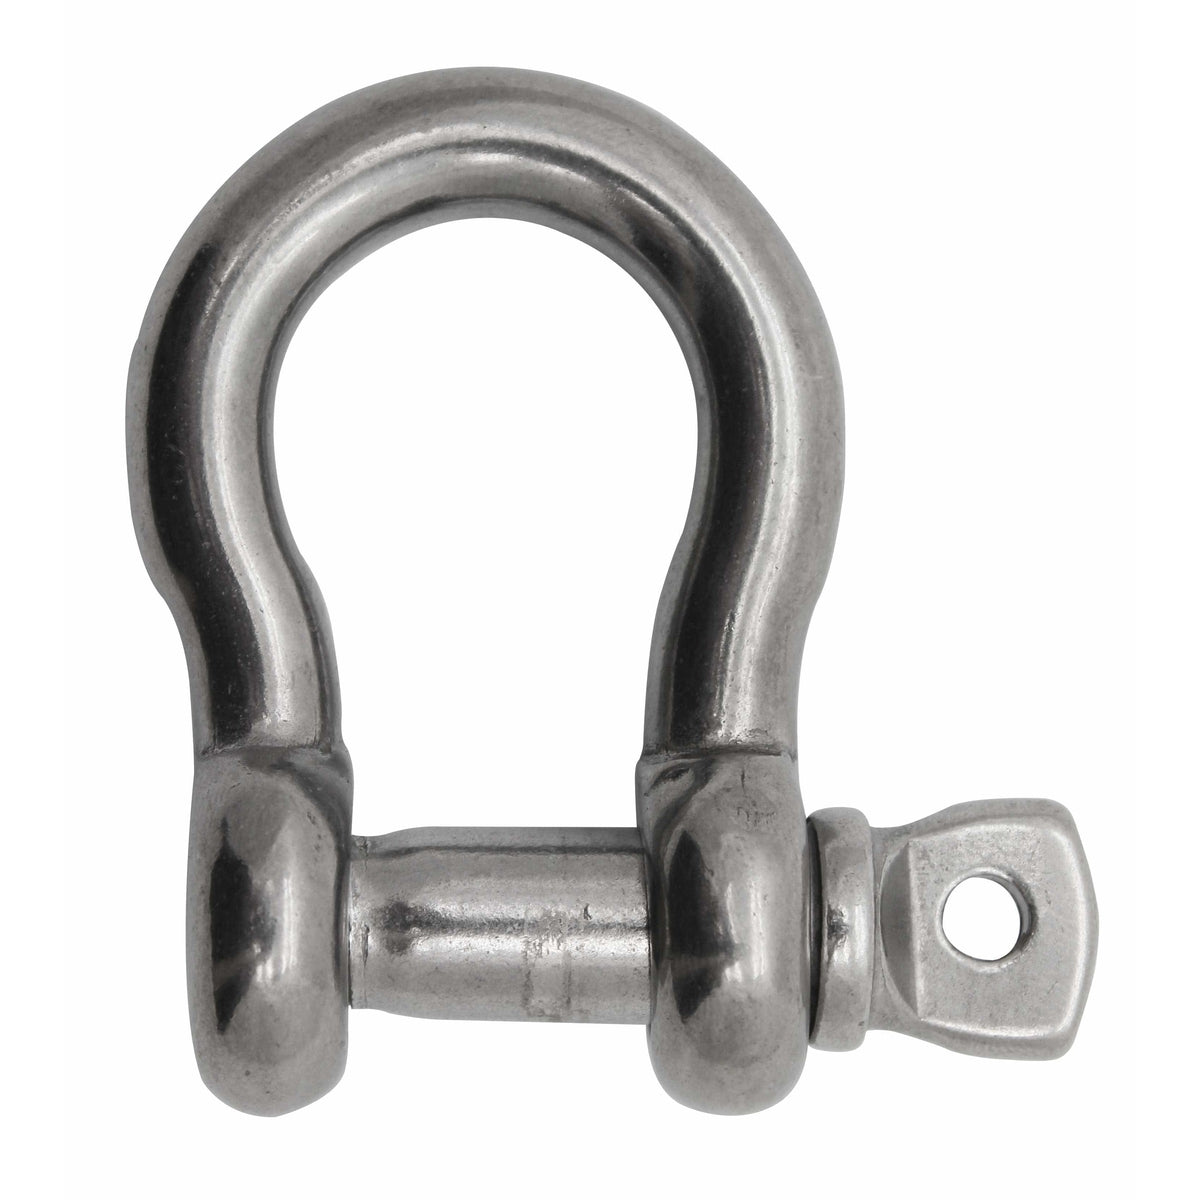 Extreme Max BoatTector SS Anchor Shackle 3/4" #3006.8329